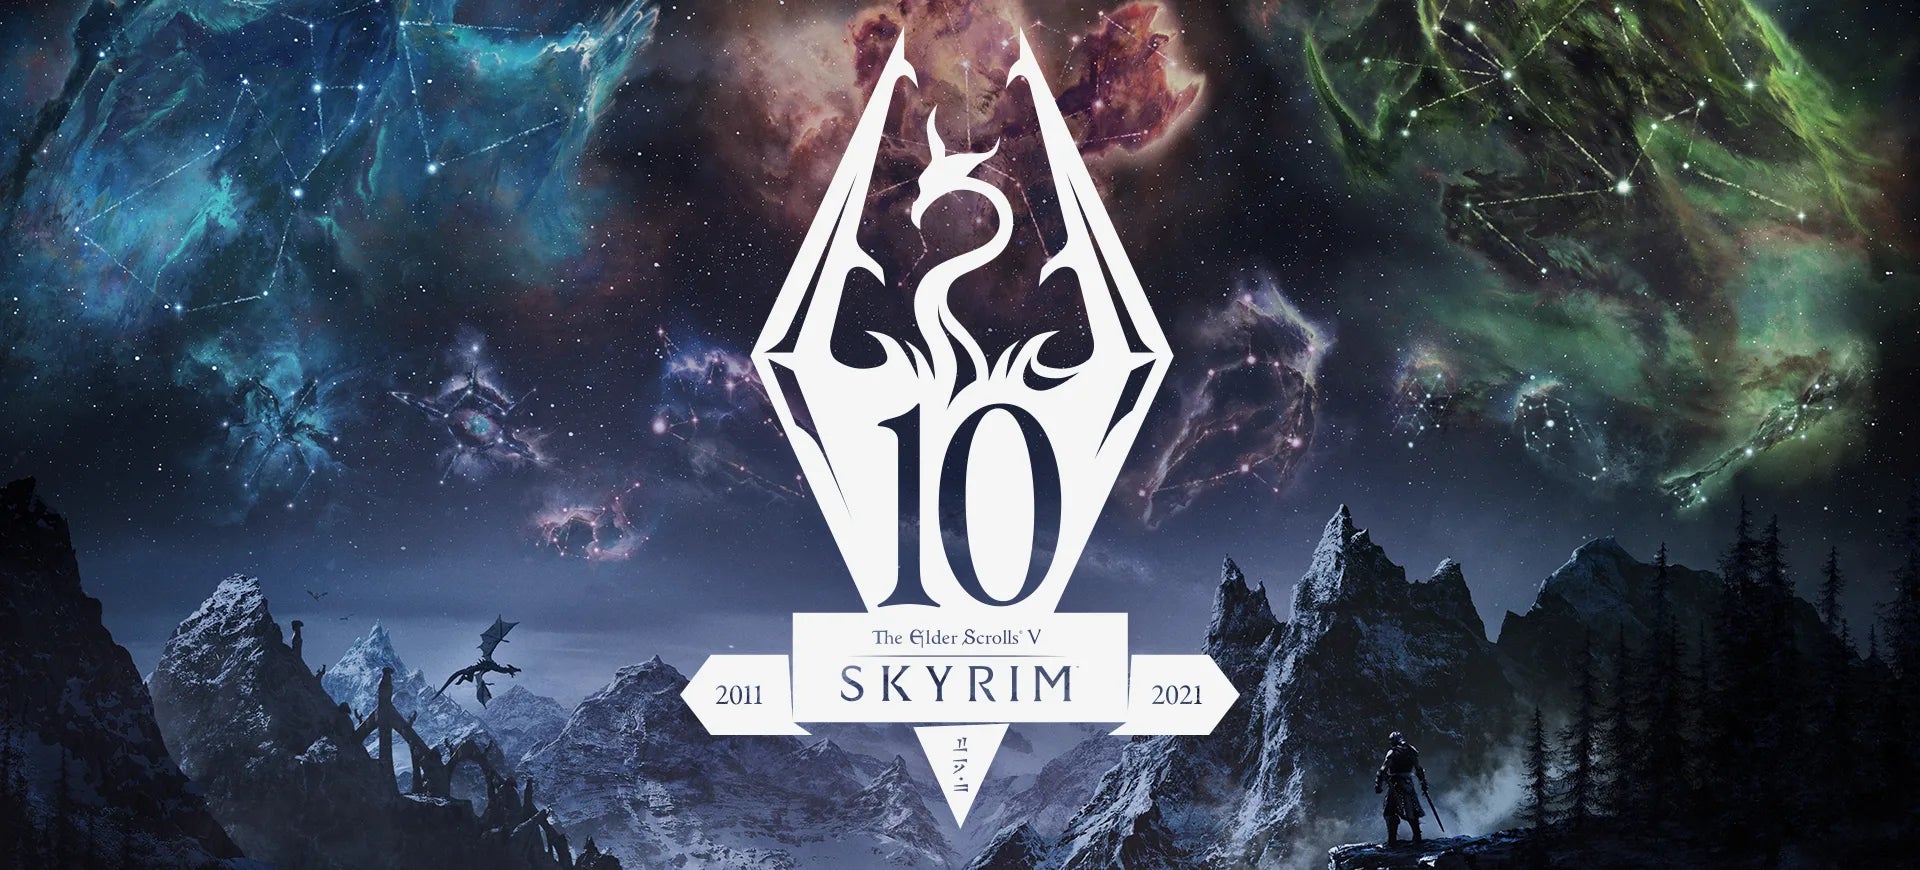 Image for Skyrim Anniversary Edition brings next-gen upgrades, and fishing